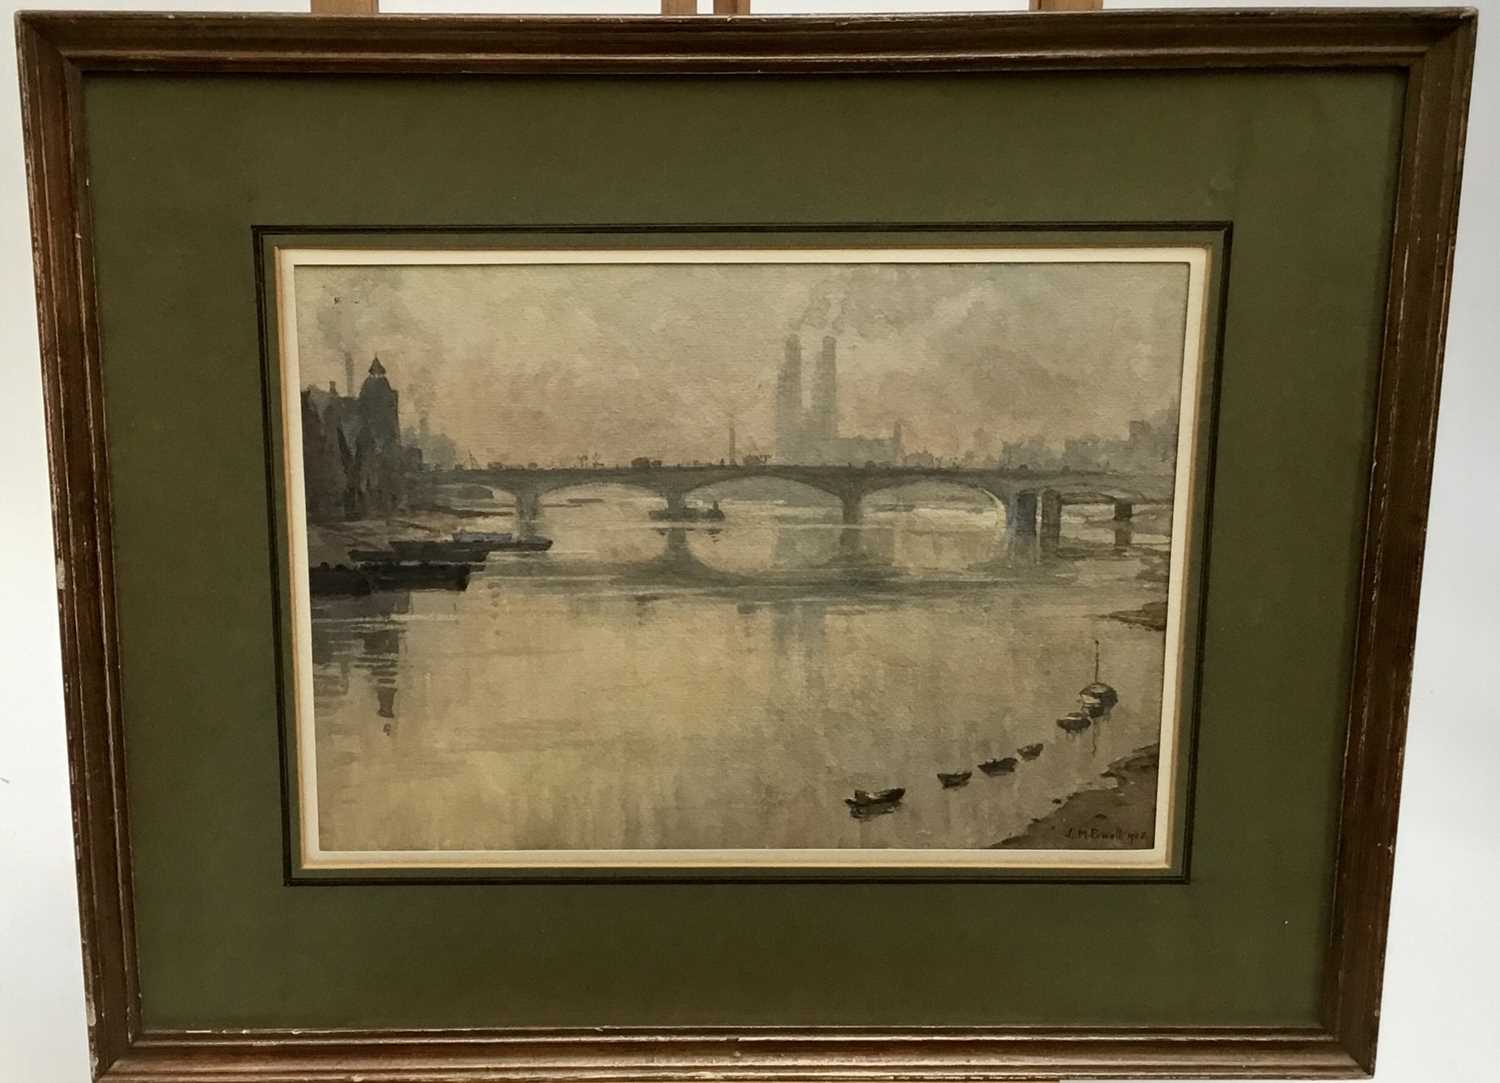 Lot 258 - J. M. Powell early 20th century watercolour - 'Fog - Battersea Bridge', signed and dated 1908